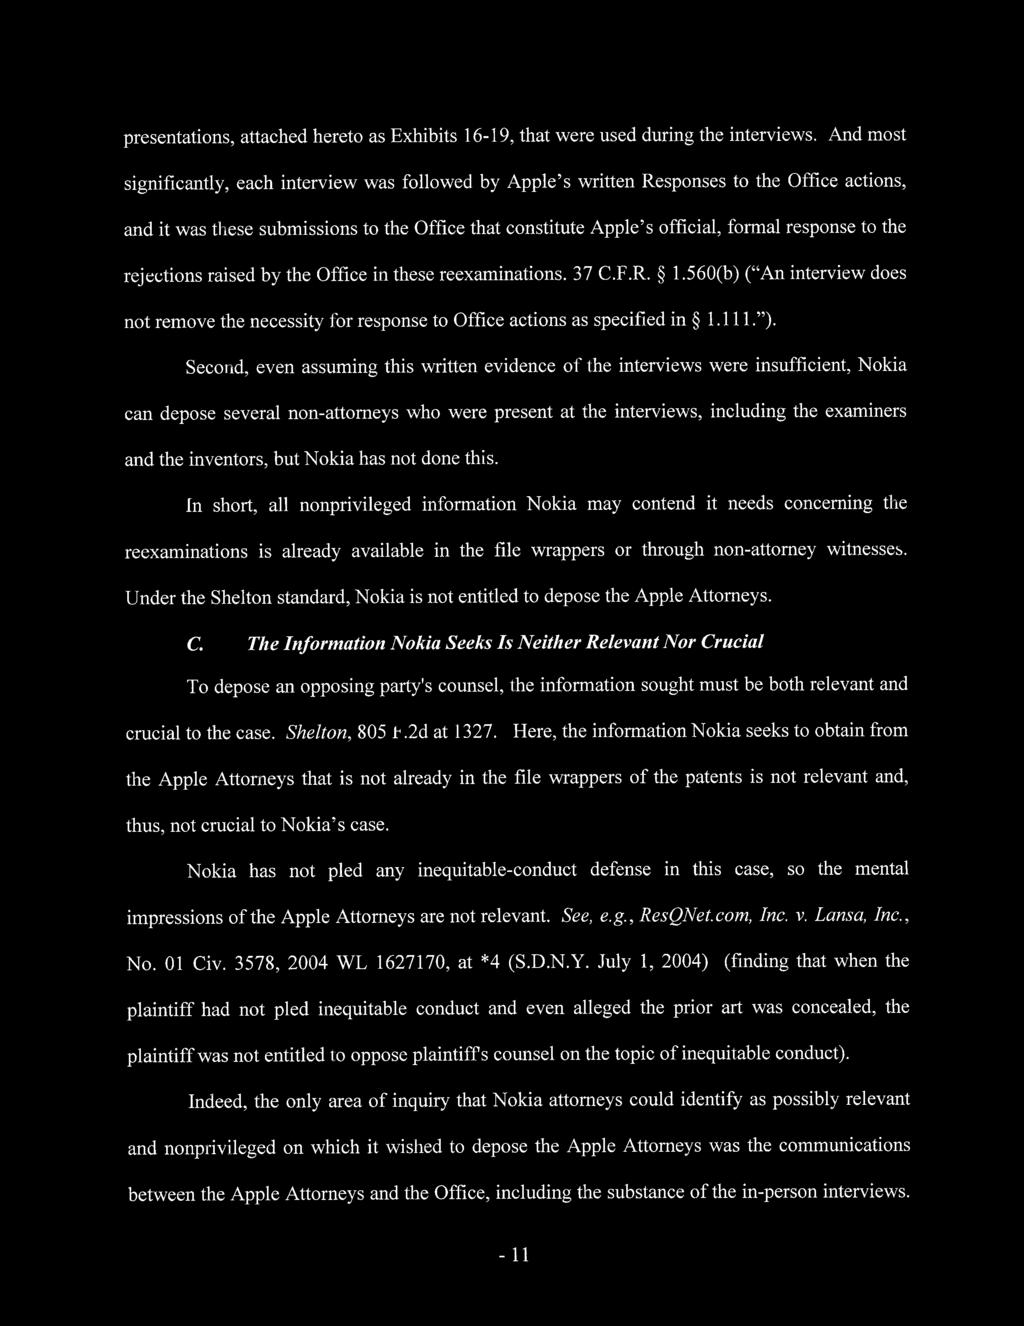 Case 1:11-mc-00295-RLW Document 1 Filed 05/17/11 Page 11 of 14 presentations, attached hereto as Exhibits 16-19, that were used during the interviews.